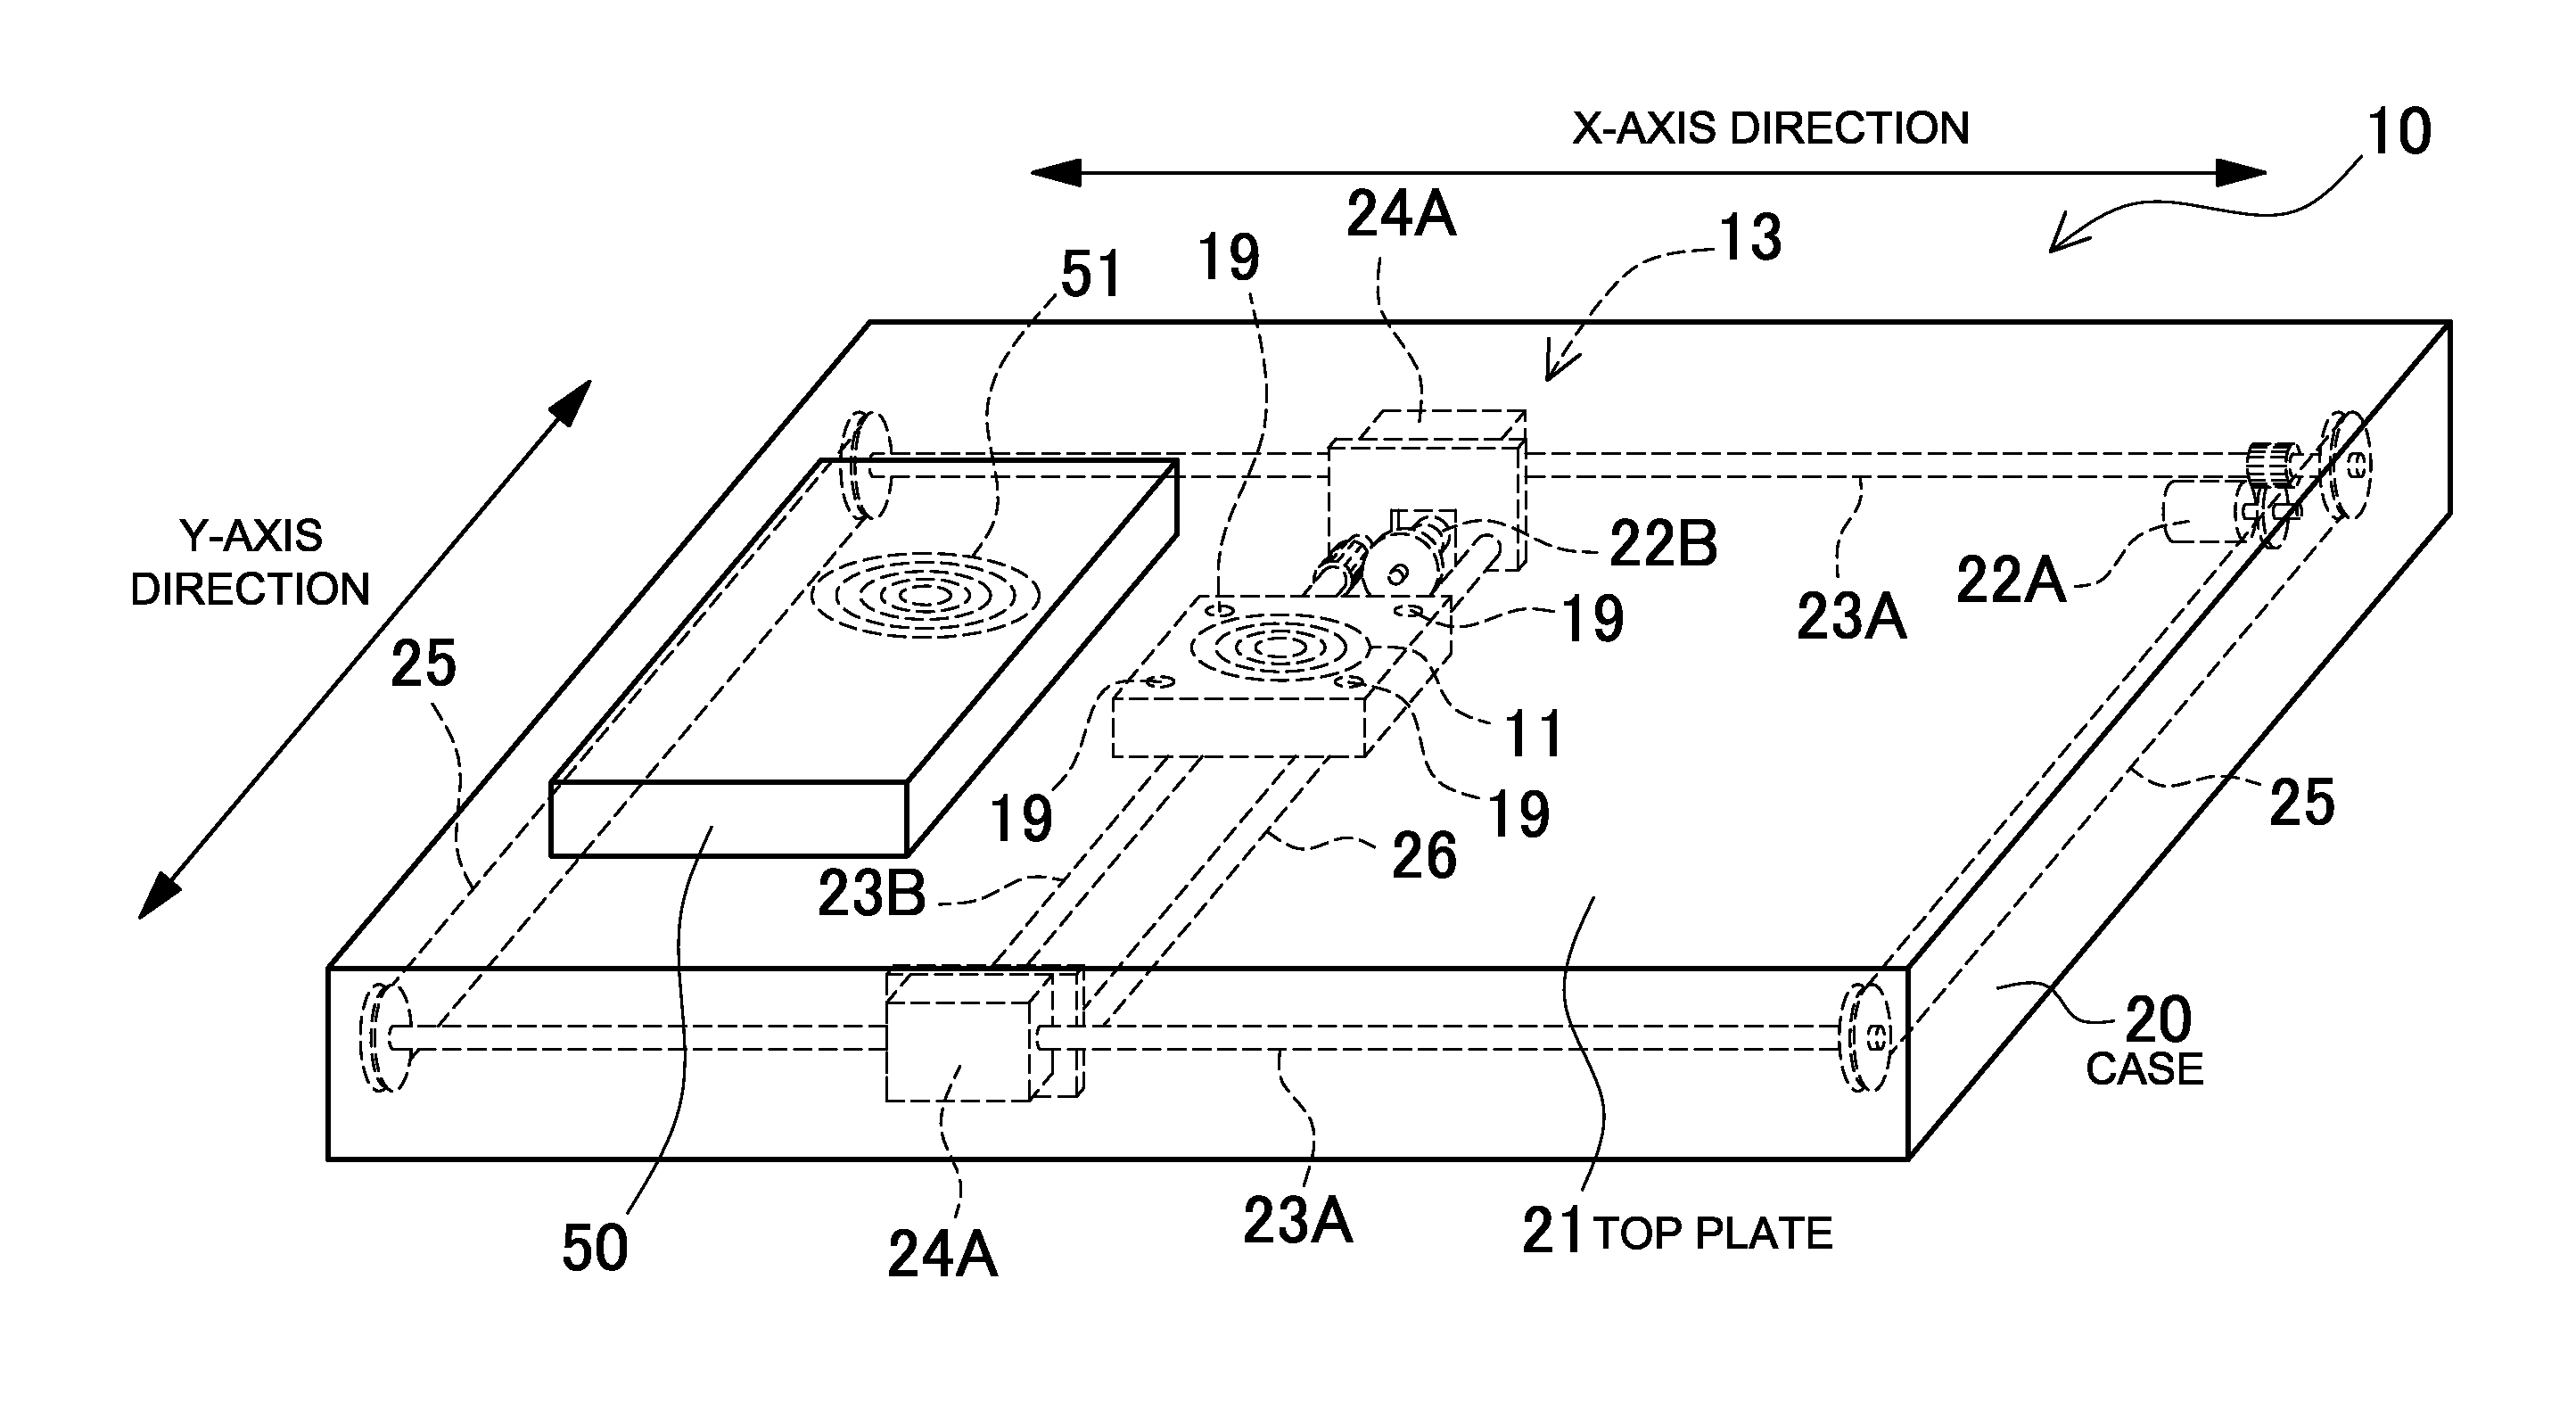 Device housing a battery and charging pad